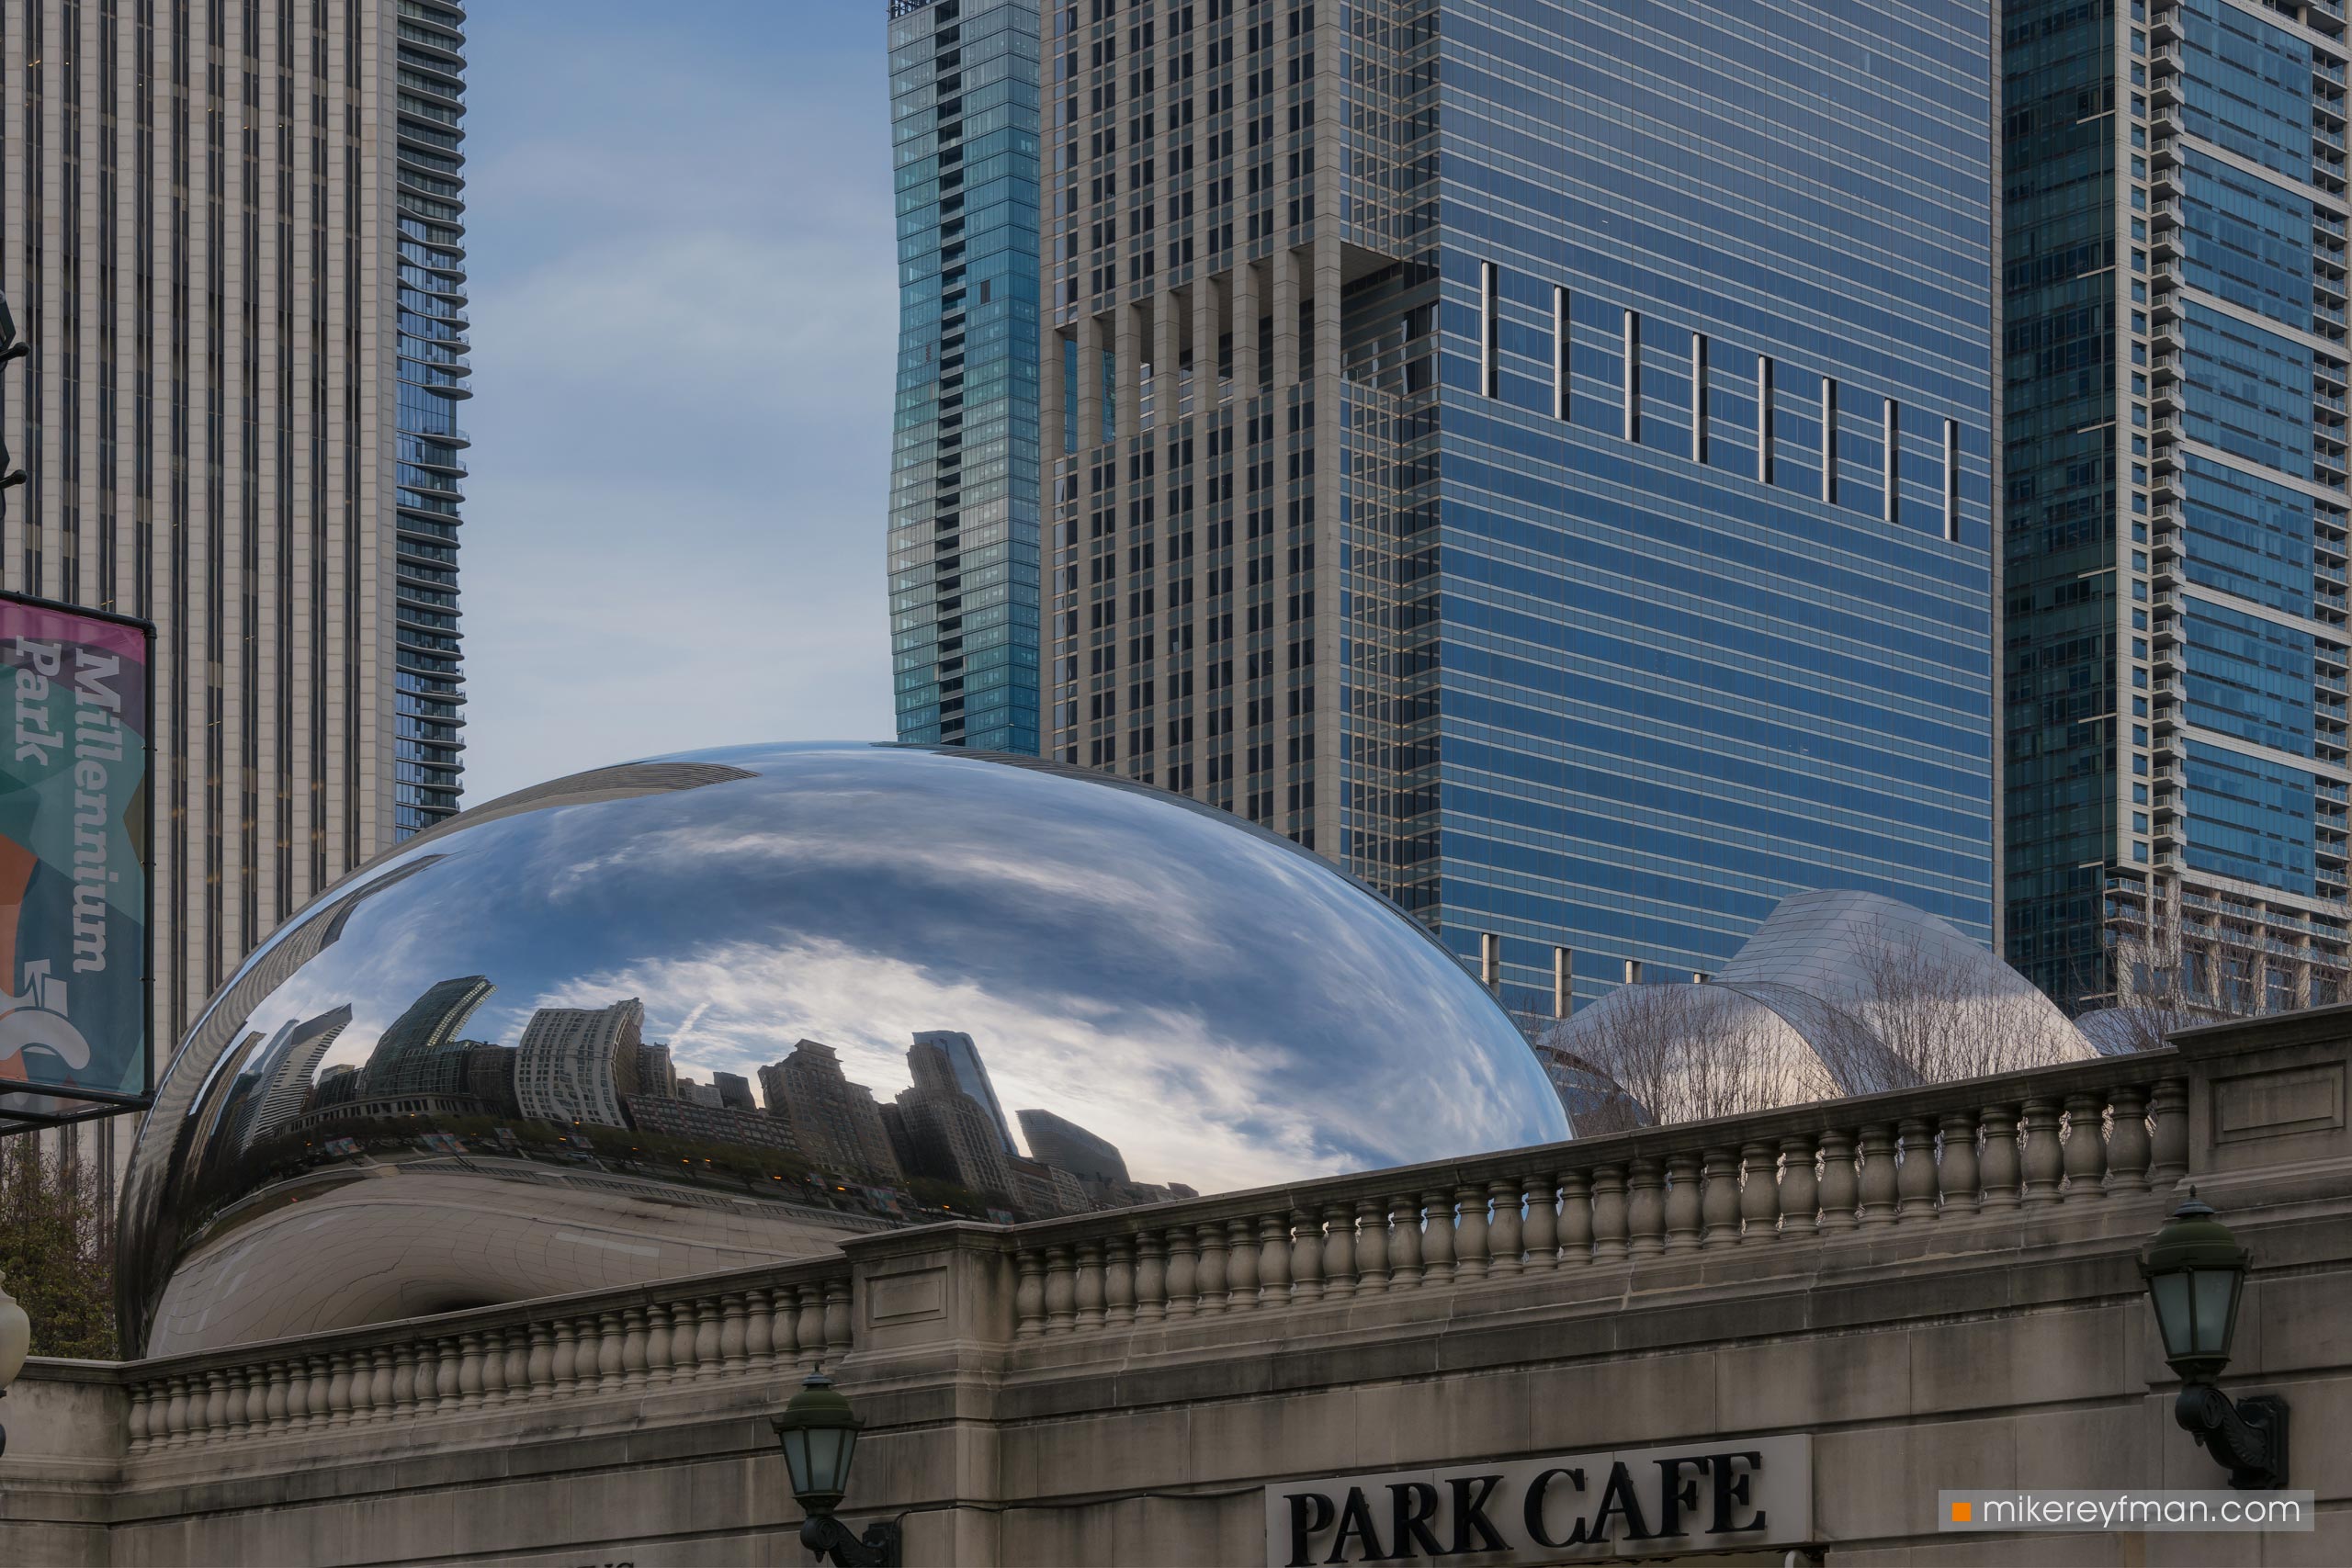 The Cloud Gate, also known as the Bean, at Millenium Park, Chicago, Illinois, USA. 074-CH-2_ZRA8533 - Ever-beating architectural heart of America. The birthplace of the most iconic buildings in the country. - Mike Reyfman Photography